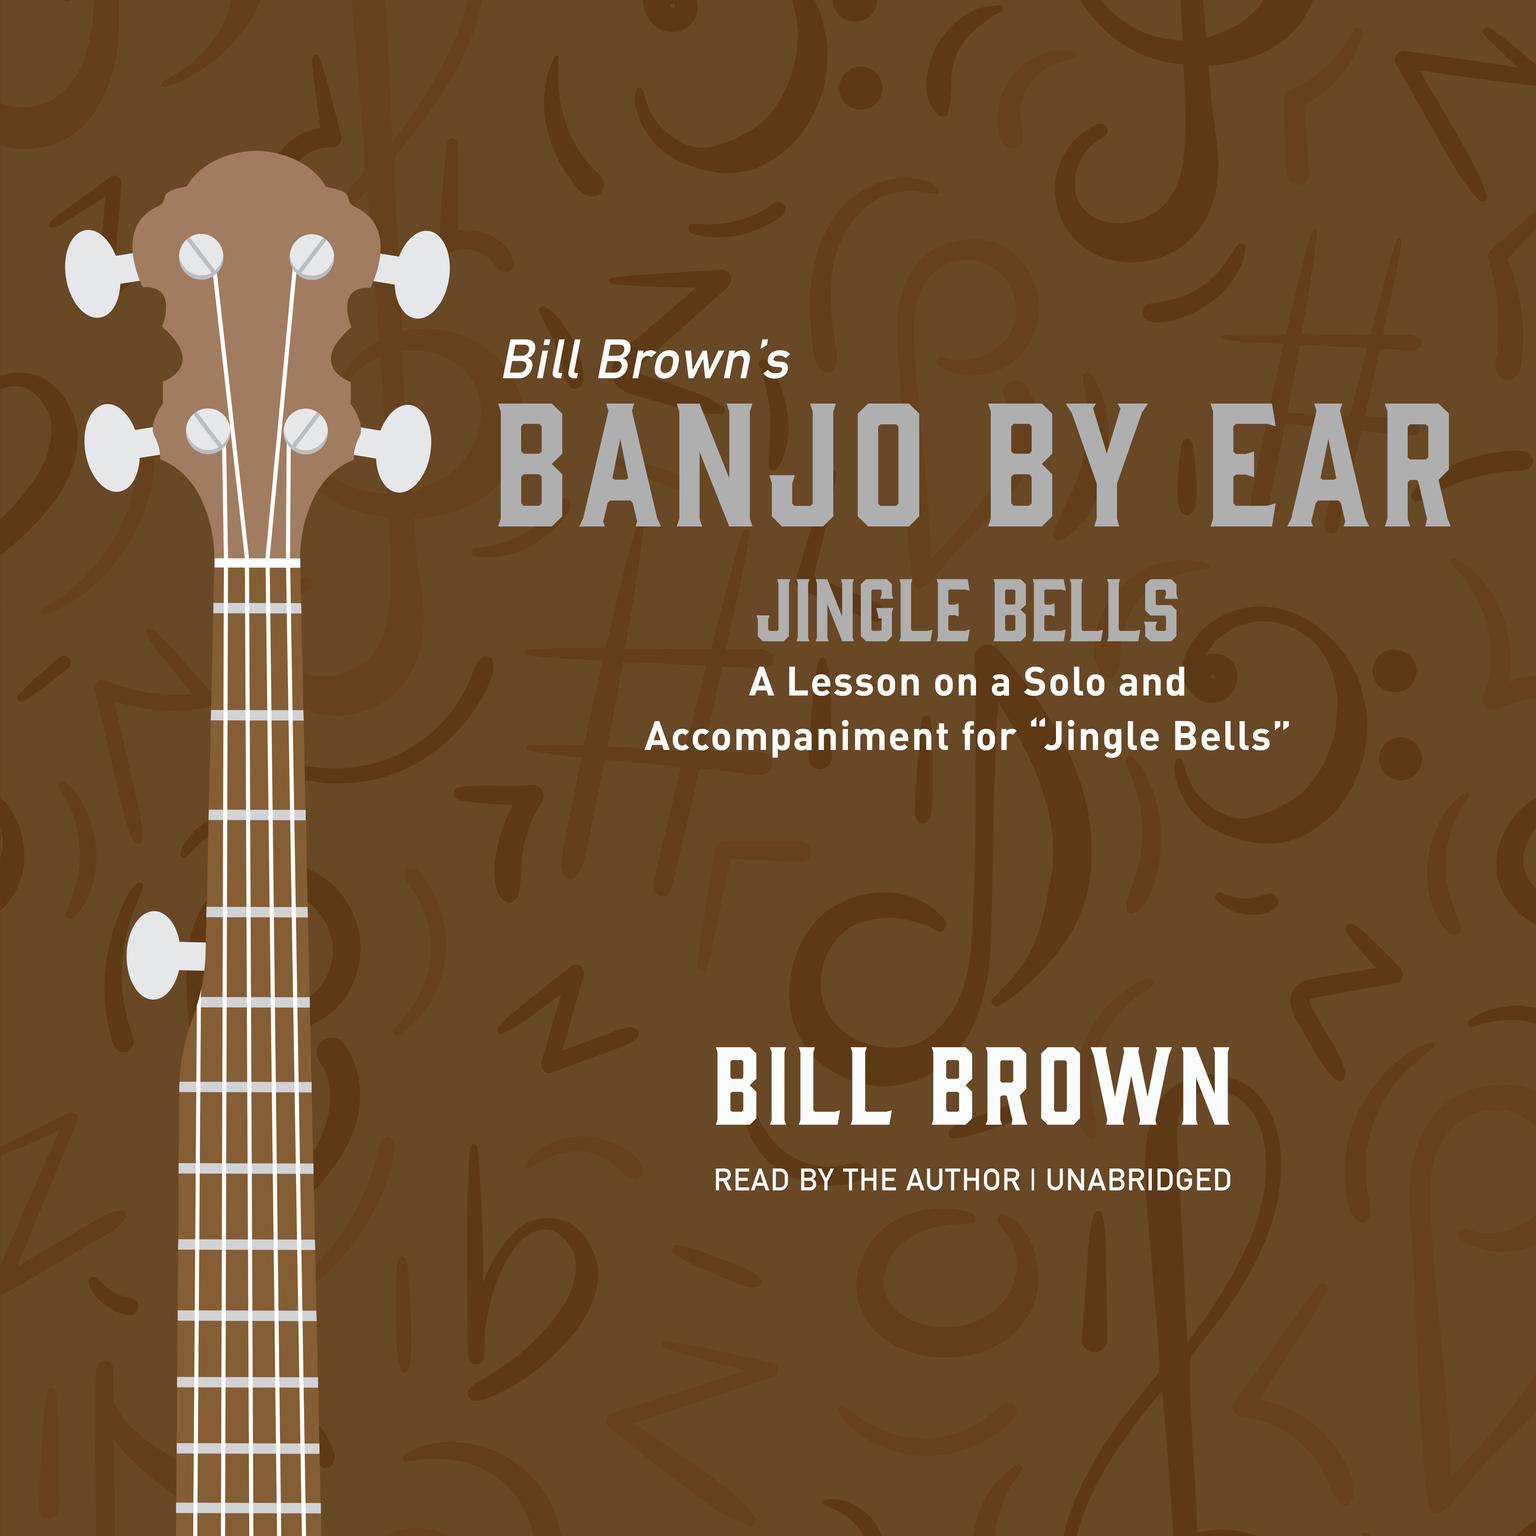 Jingle Bells: A Lesson on a Solo and Accompaniment for “Jingle Bells”  Audiobook, by Bill Brown